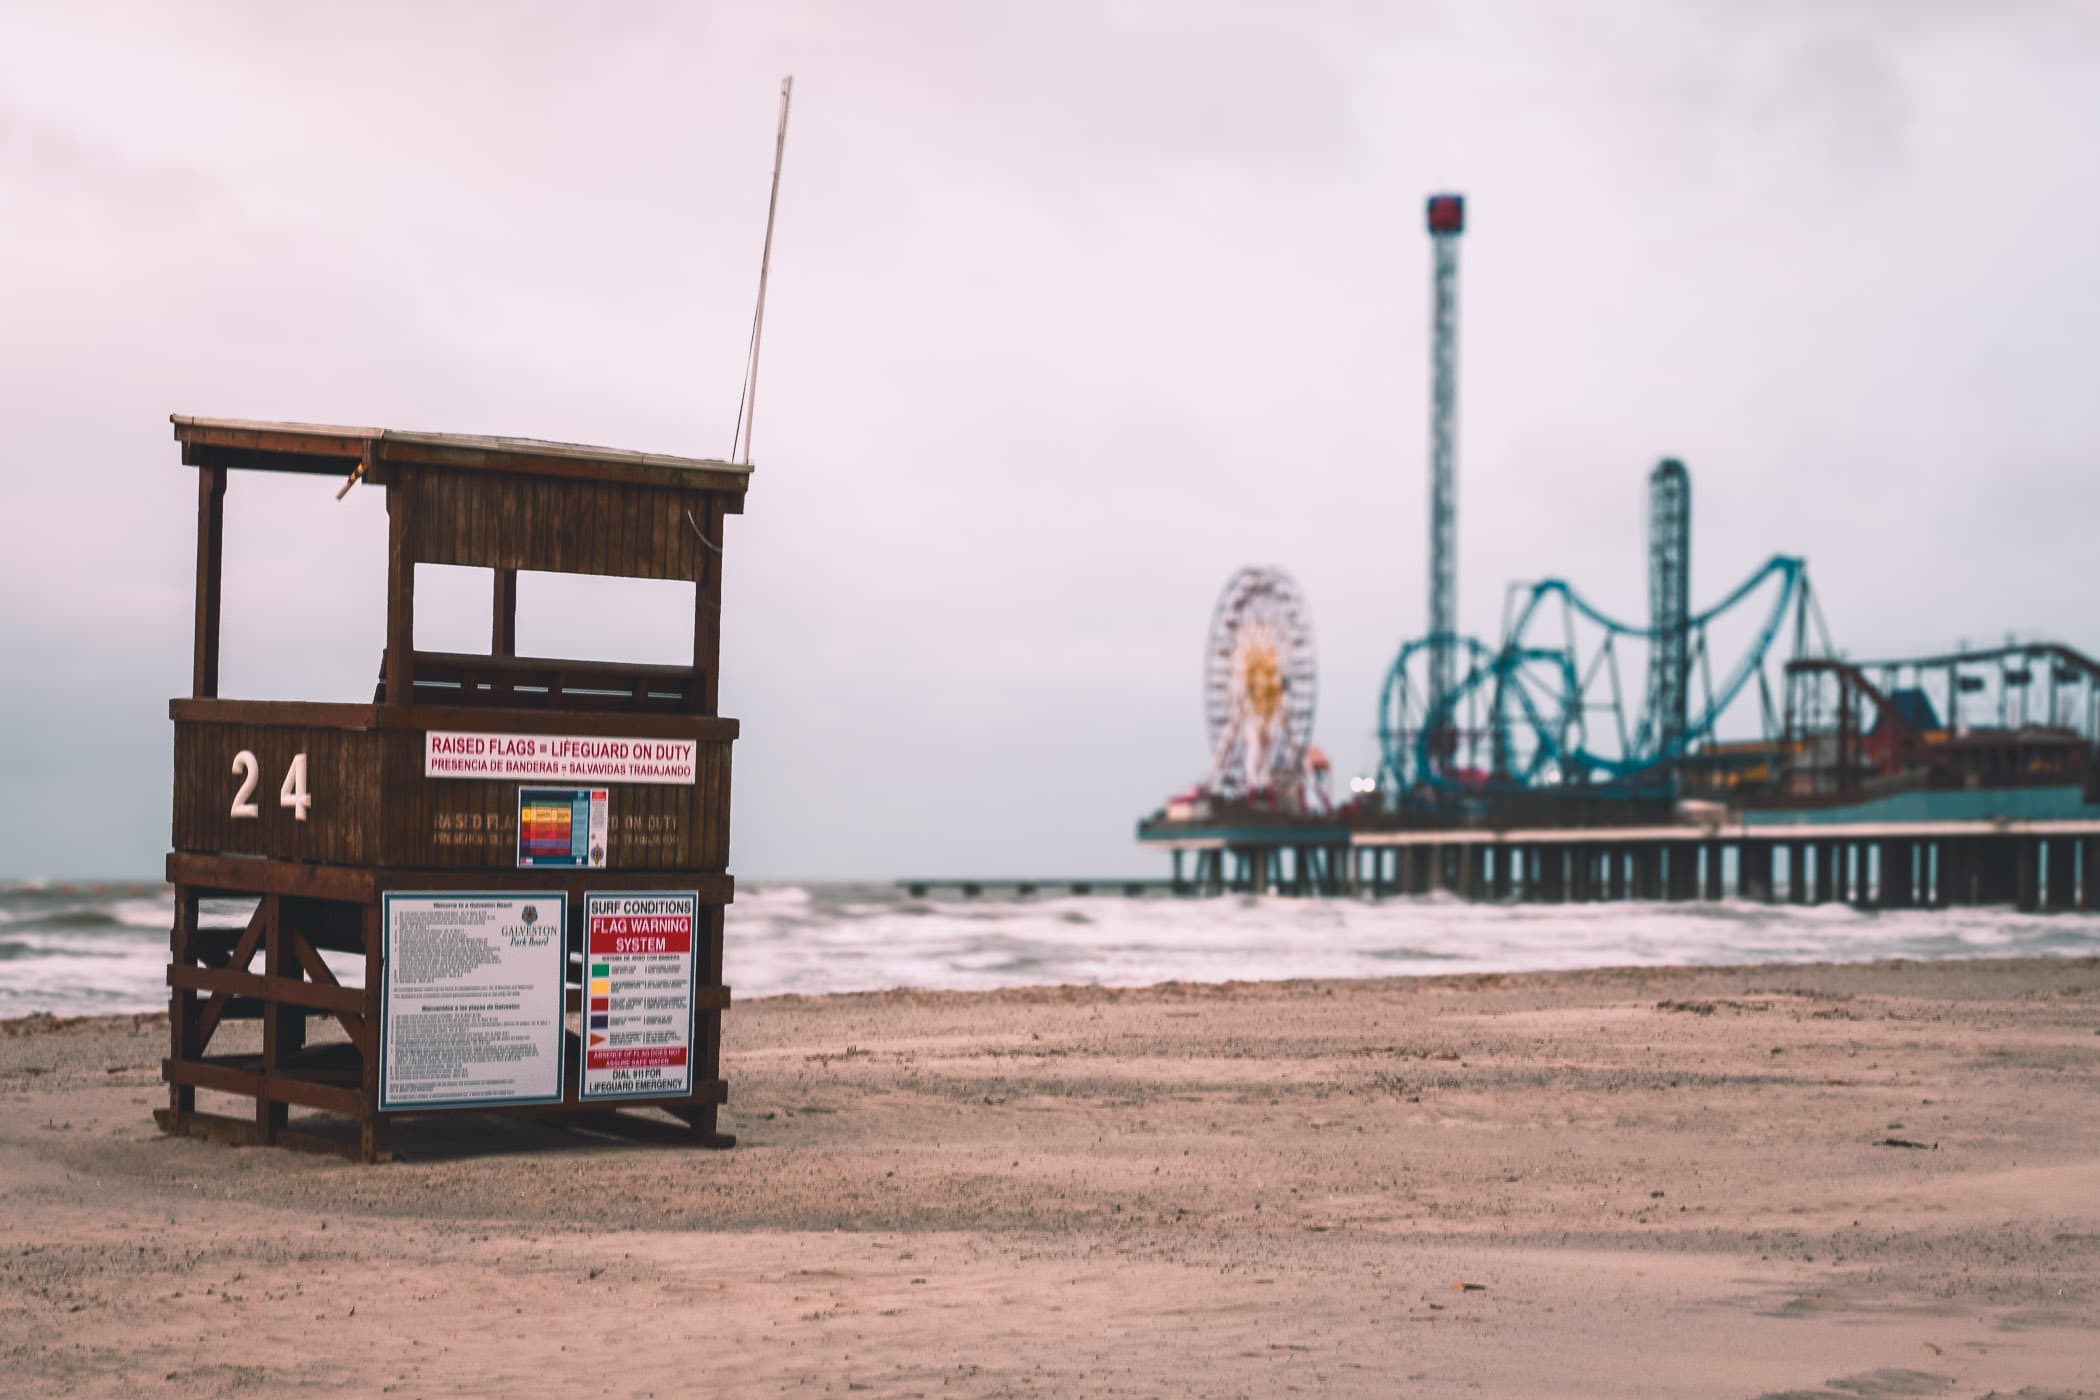 A lifeguard station stands empty on a cold day in Galveston, Texas.